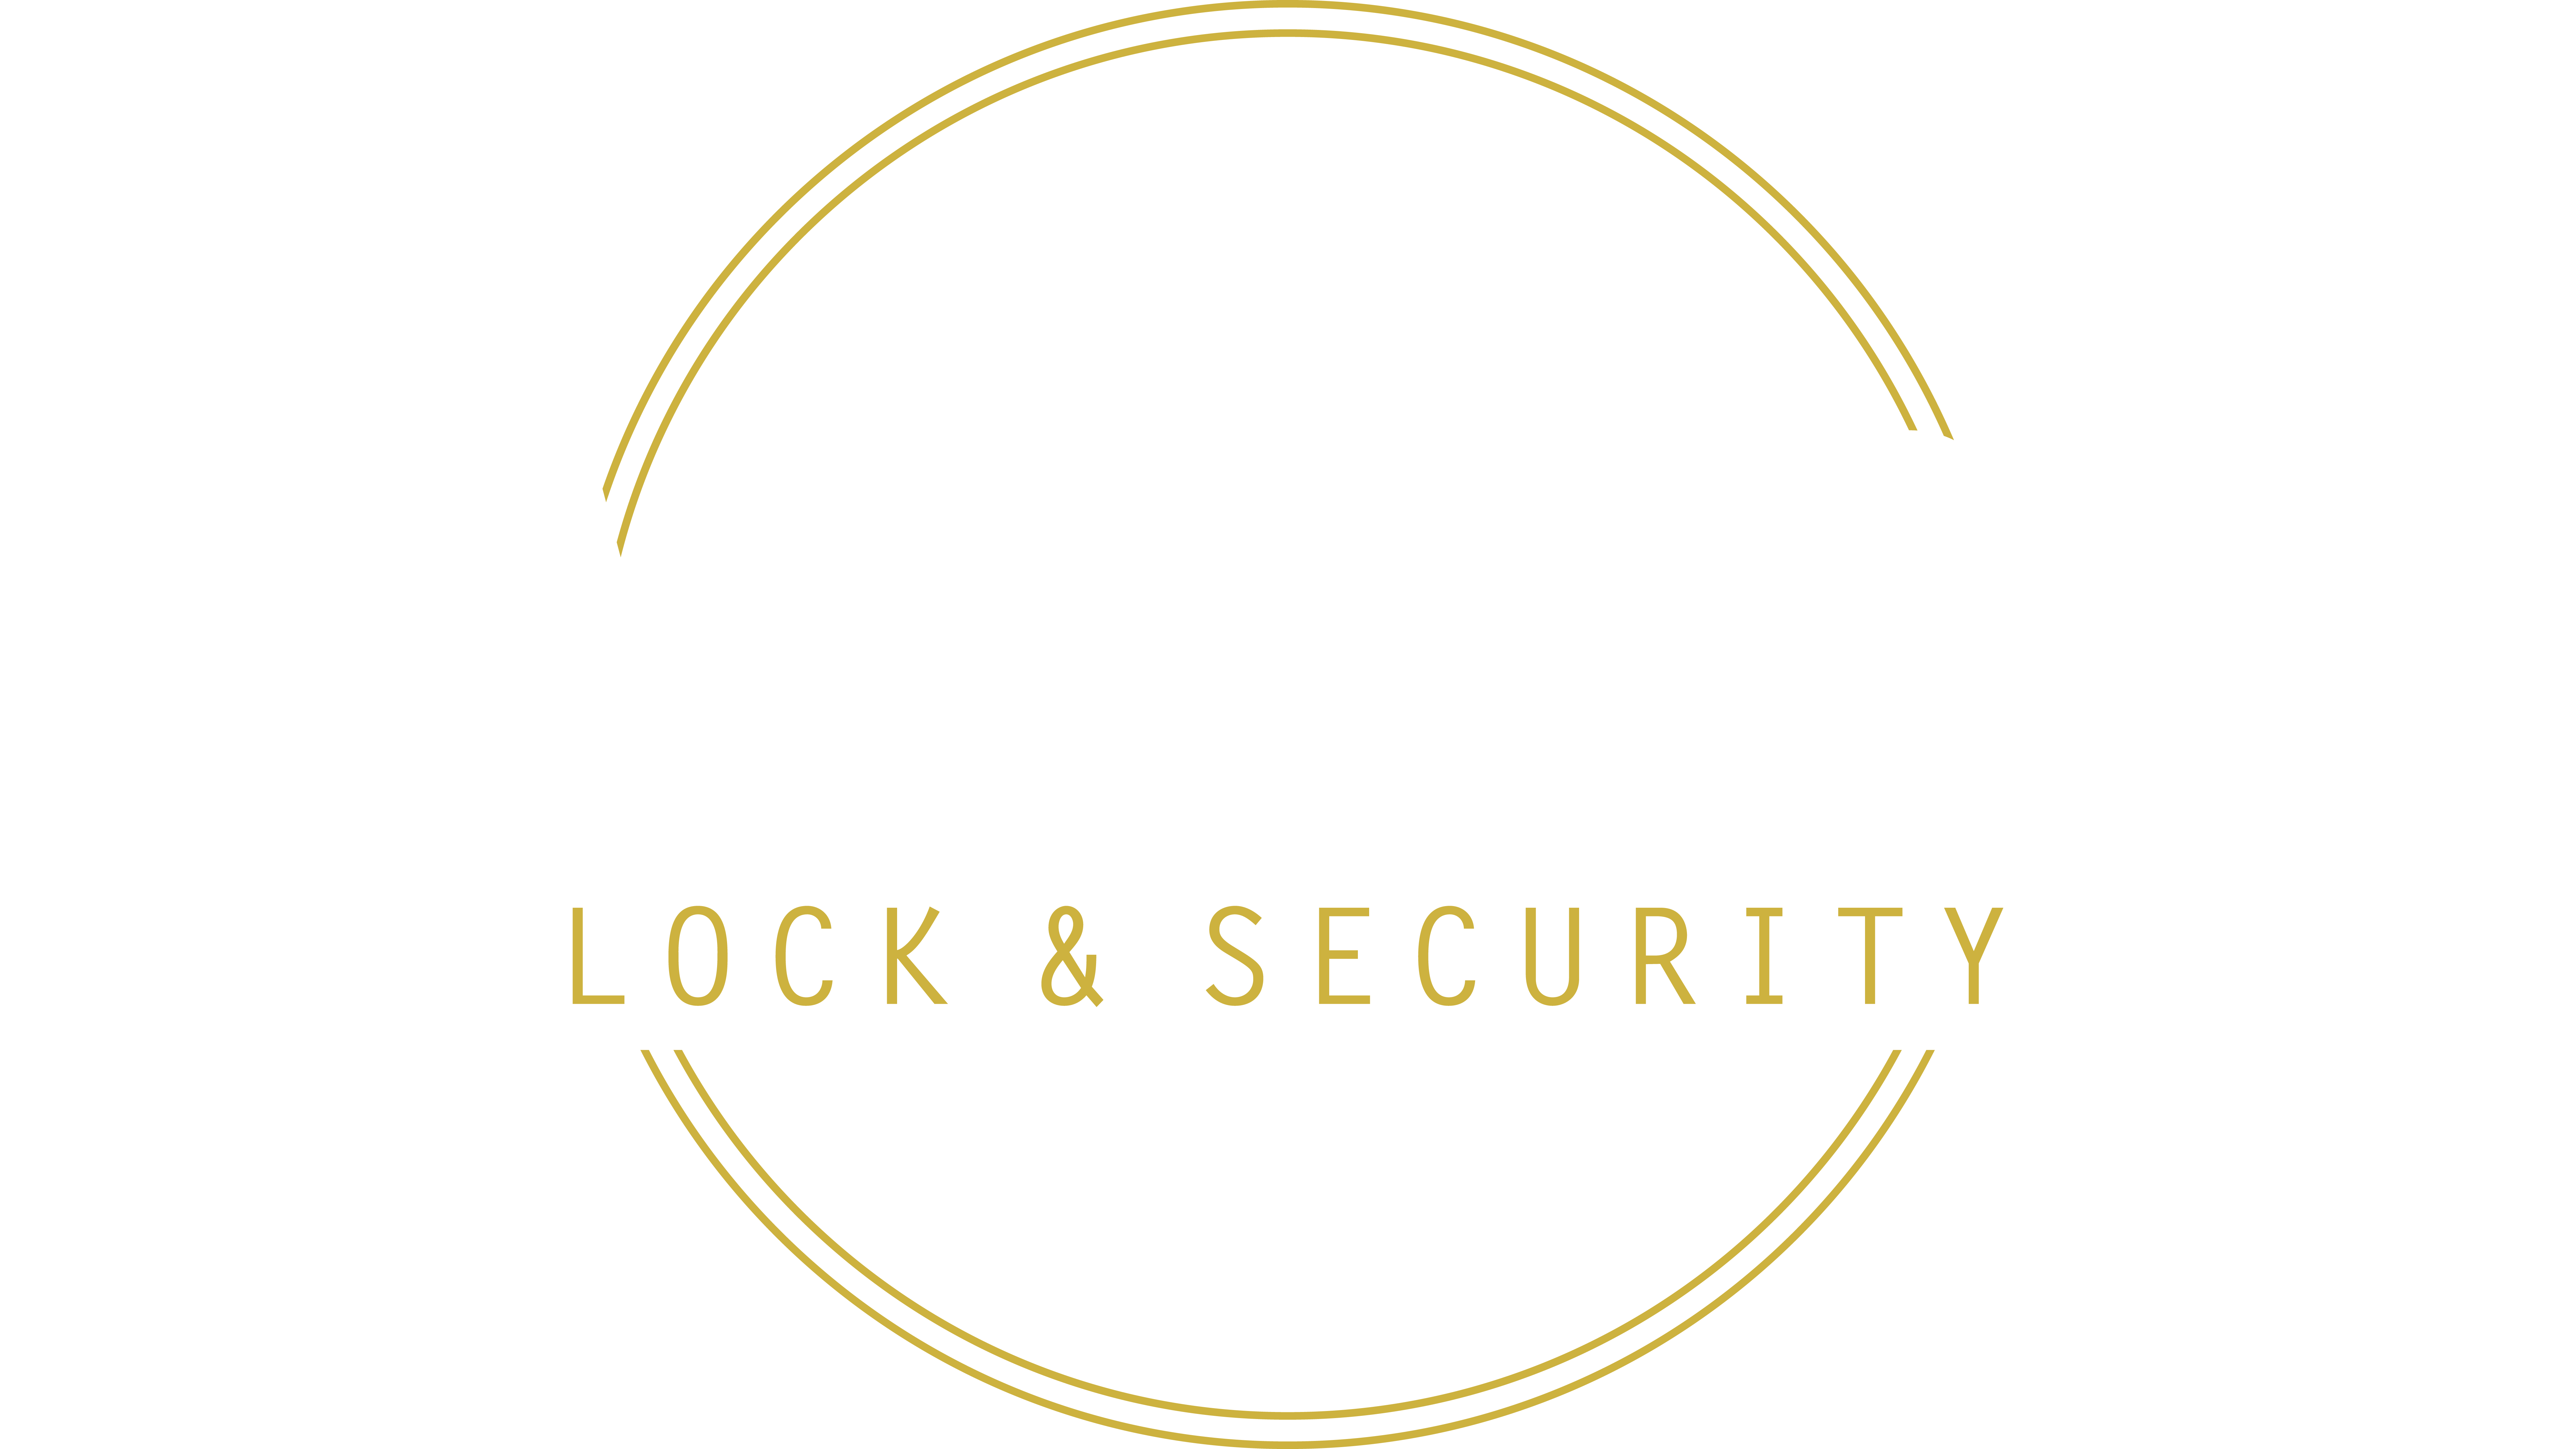 levis's lock and security